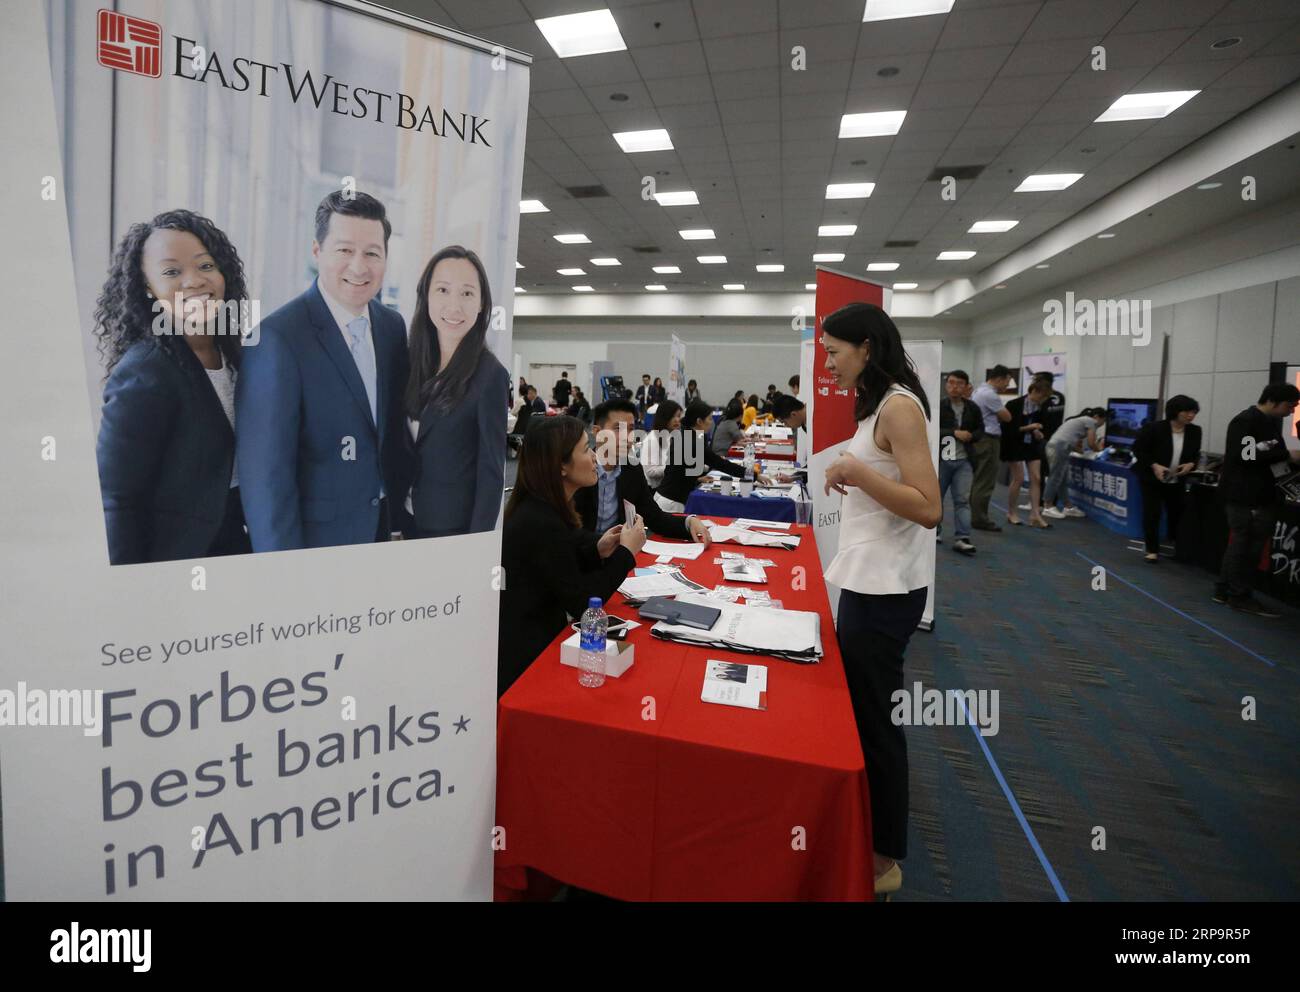 (190415) -- LOS ANGELES, April 15, 2019 (Xinhua) -- A job hunter talks with an employer during the second CUAAASC Career Development Forum and Expo in Los Angeles, the United States, April 13, 2019. The career event was co-hosted by the Chinese University Alumni Association Alliance of Southern California (CUAAASC), an organization consisting of 50 Chinese university alumni associations including well known schools such as Tsinghua University and Peking University, and YLB Education Technology Inc. (YLB), an education platform that provides dedicated connections between international students Stock Photo